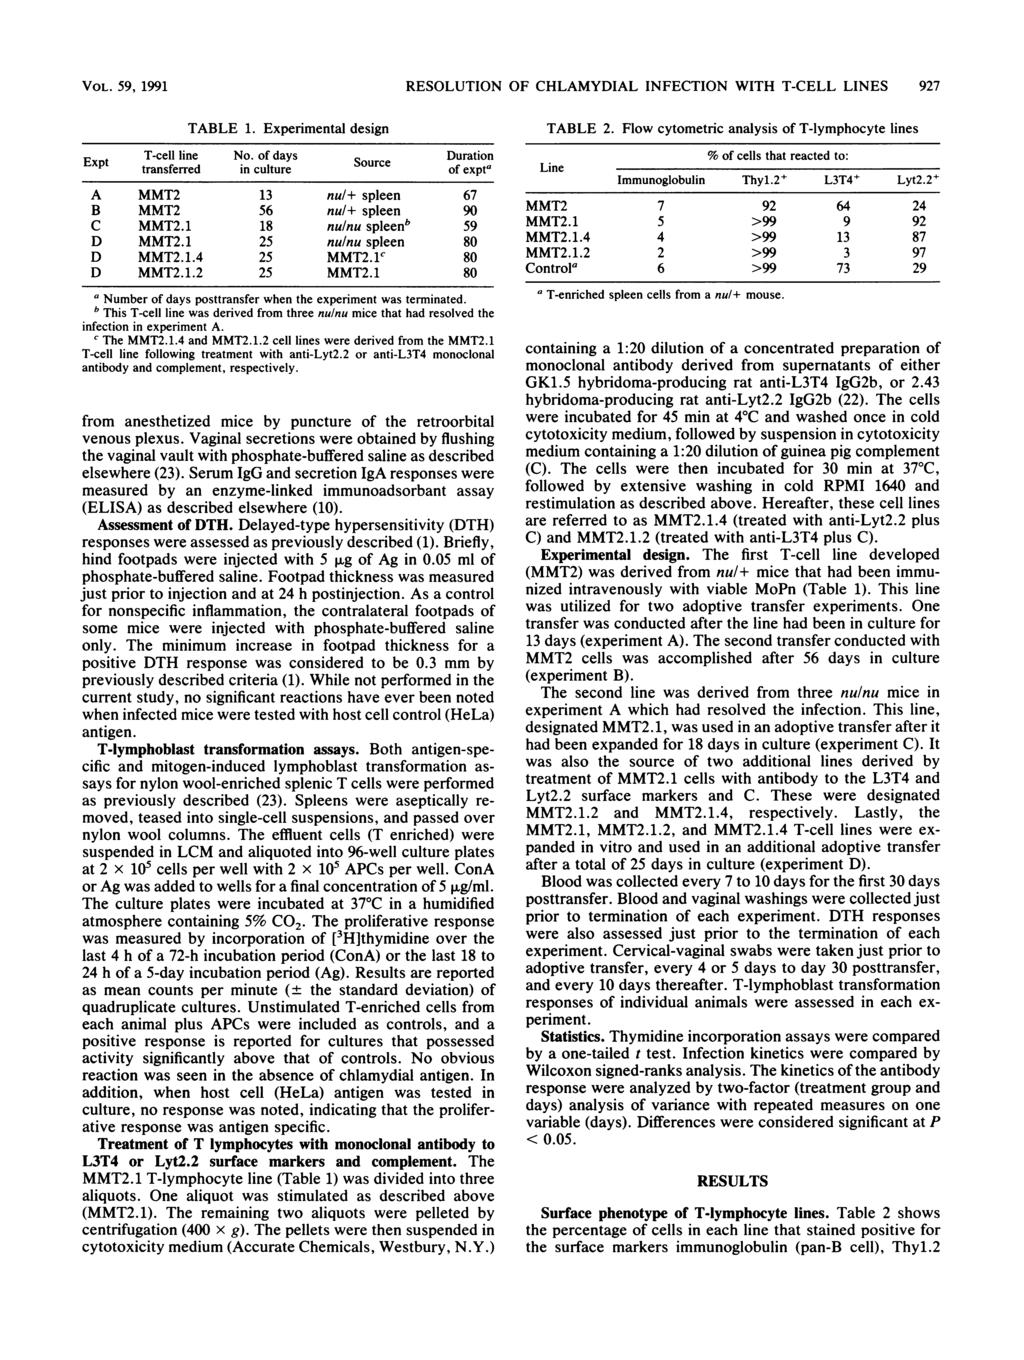 VOL. 59, 1991 RESOLUTION OF CHLAMYDIAL INFECTION WITH T-CELL LINES 927 TABLE 1. Experimental design Expt T-cell line No.